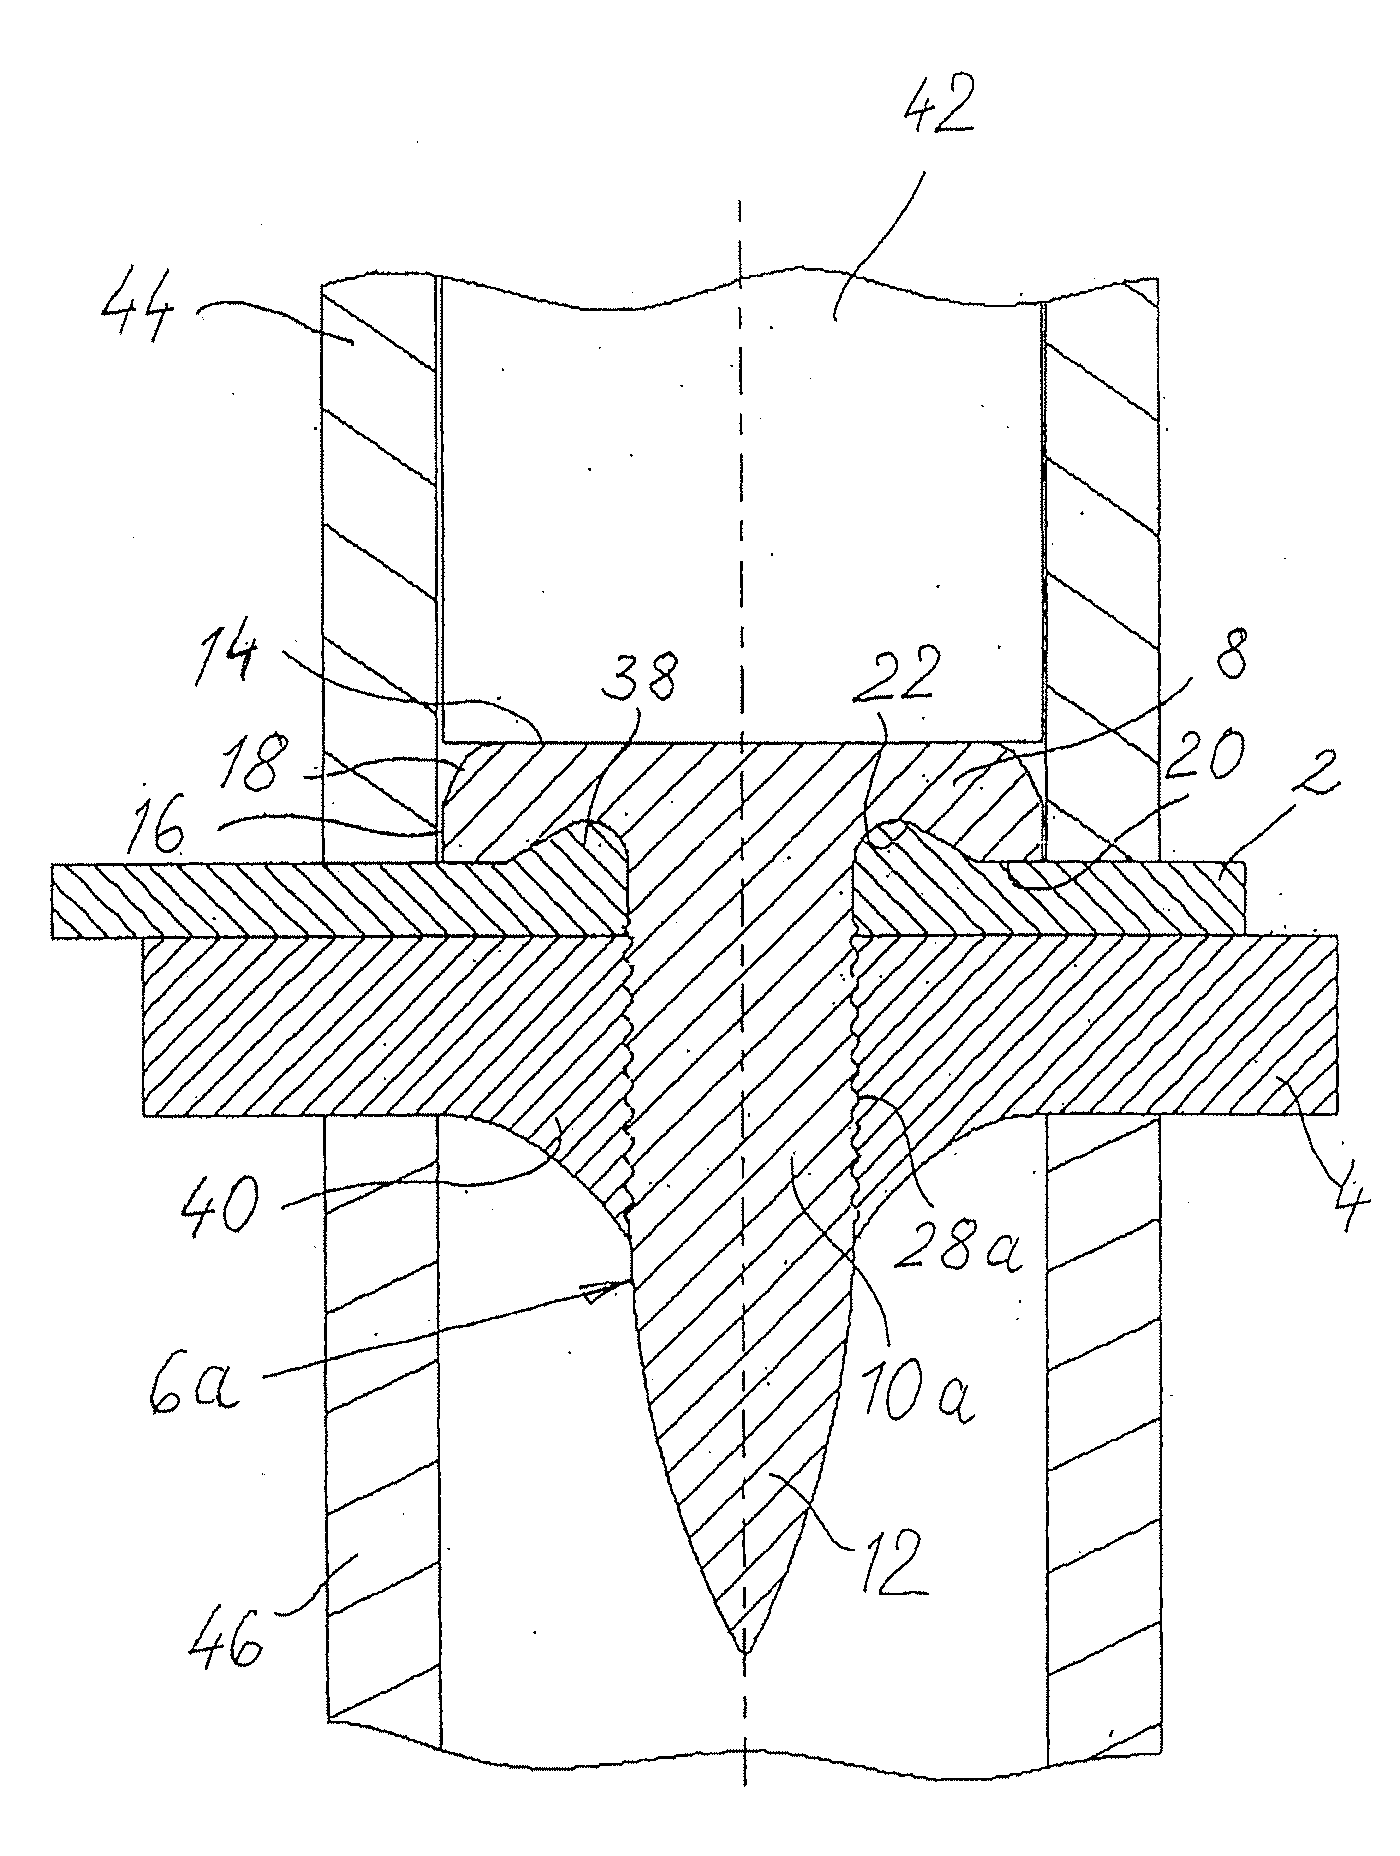 Method for Establishing a Nail Connection and Nails Therefor